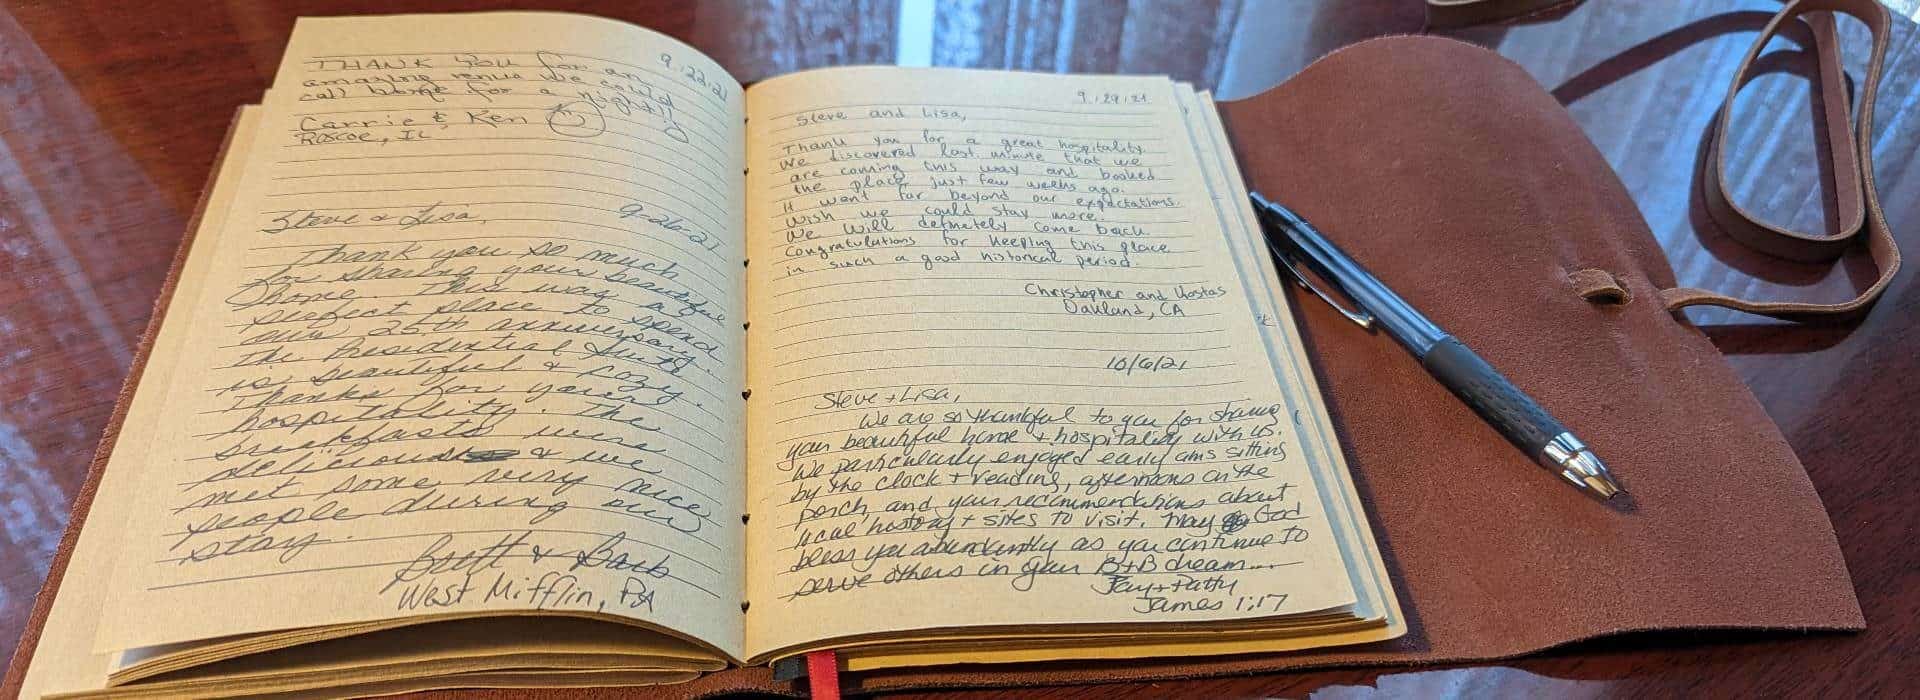 Leather bound journal with guest comments laying open on a wooden table